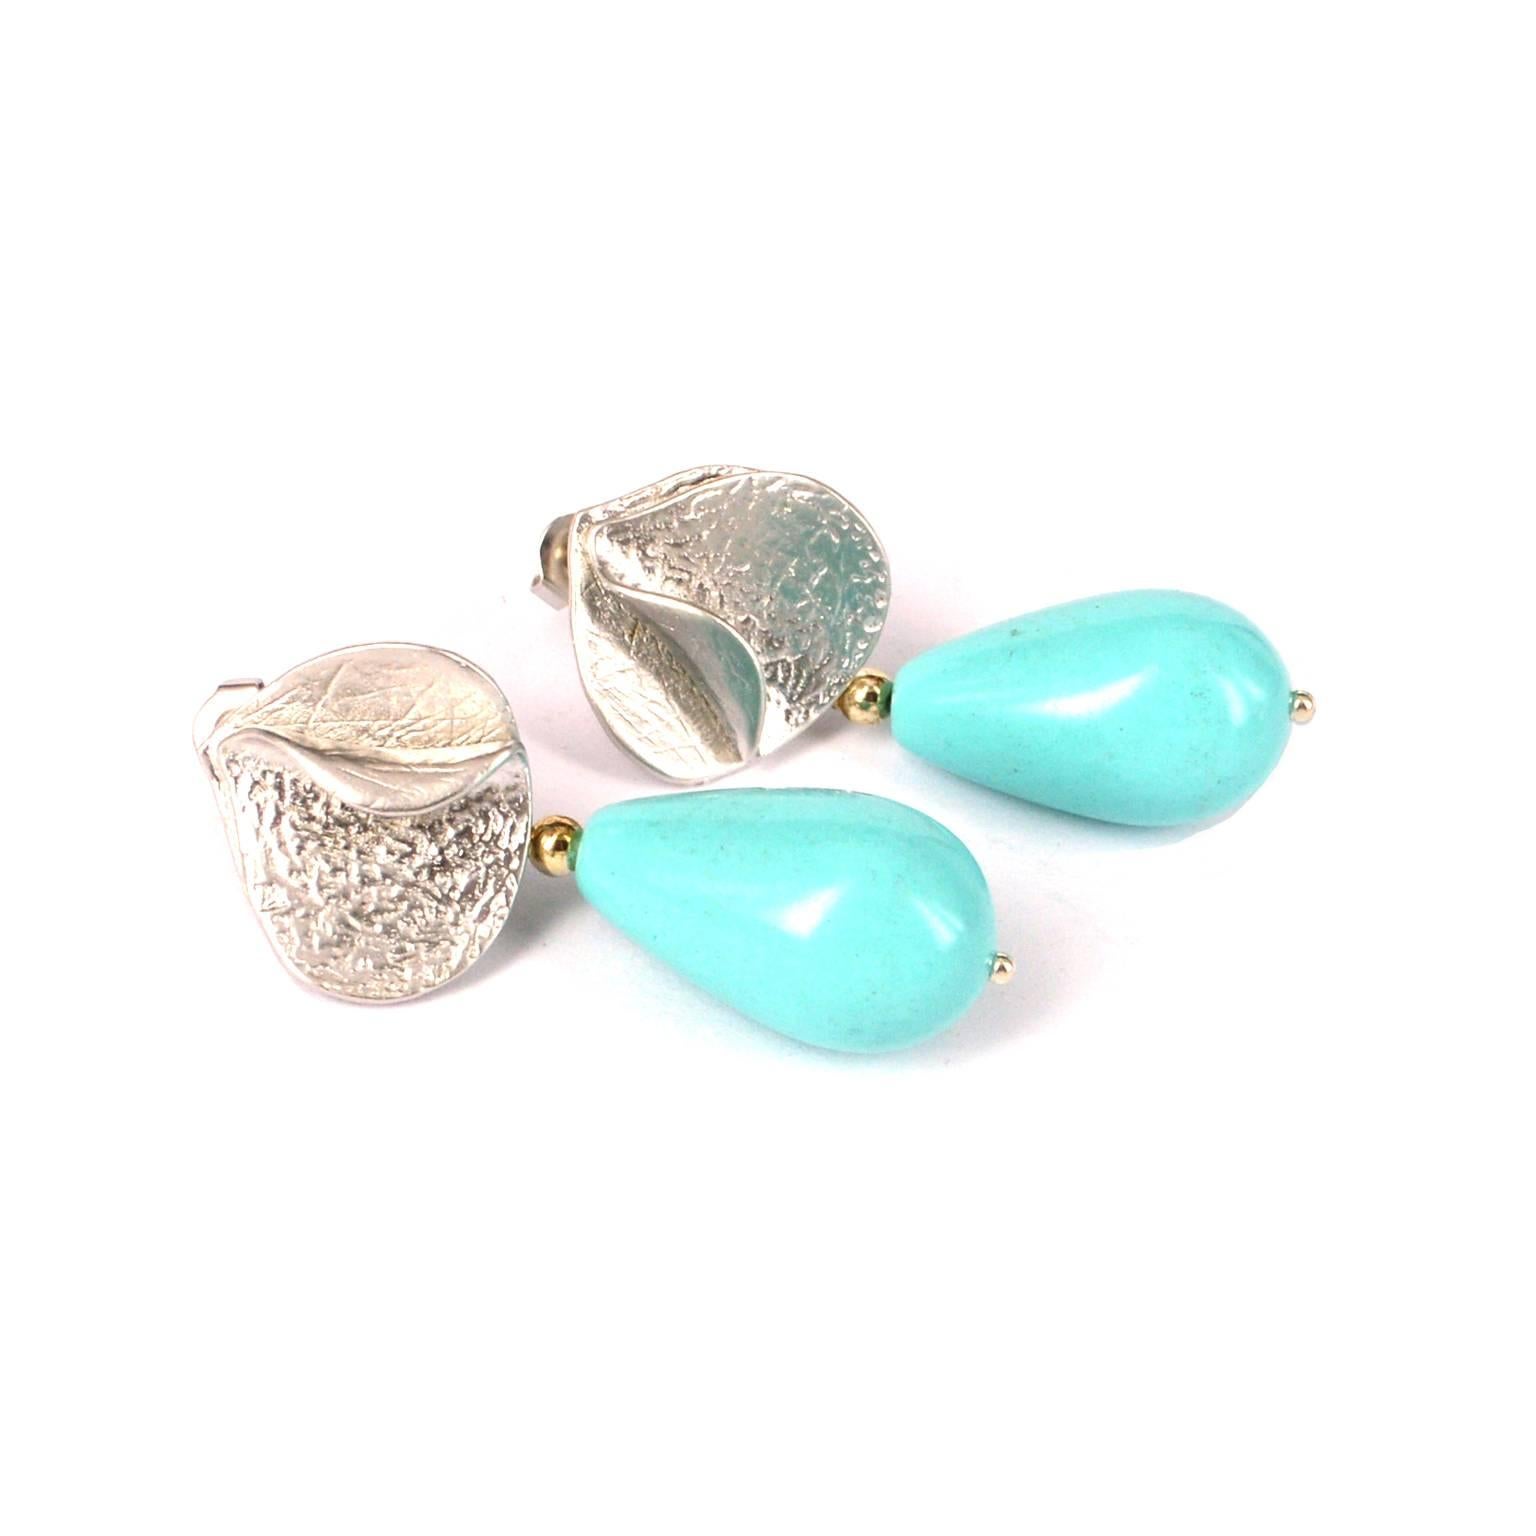 White gold plated brass stud with Sterling Silver post.
Turquoise blue resin tear drop measures 12mm x 20mm
Total earring drops 38mm from ear lobe.
